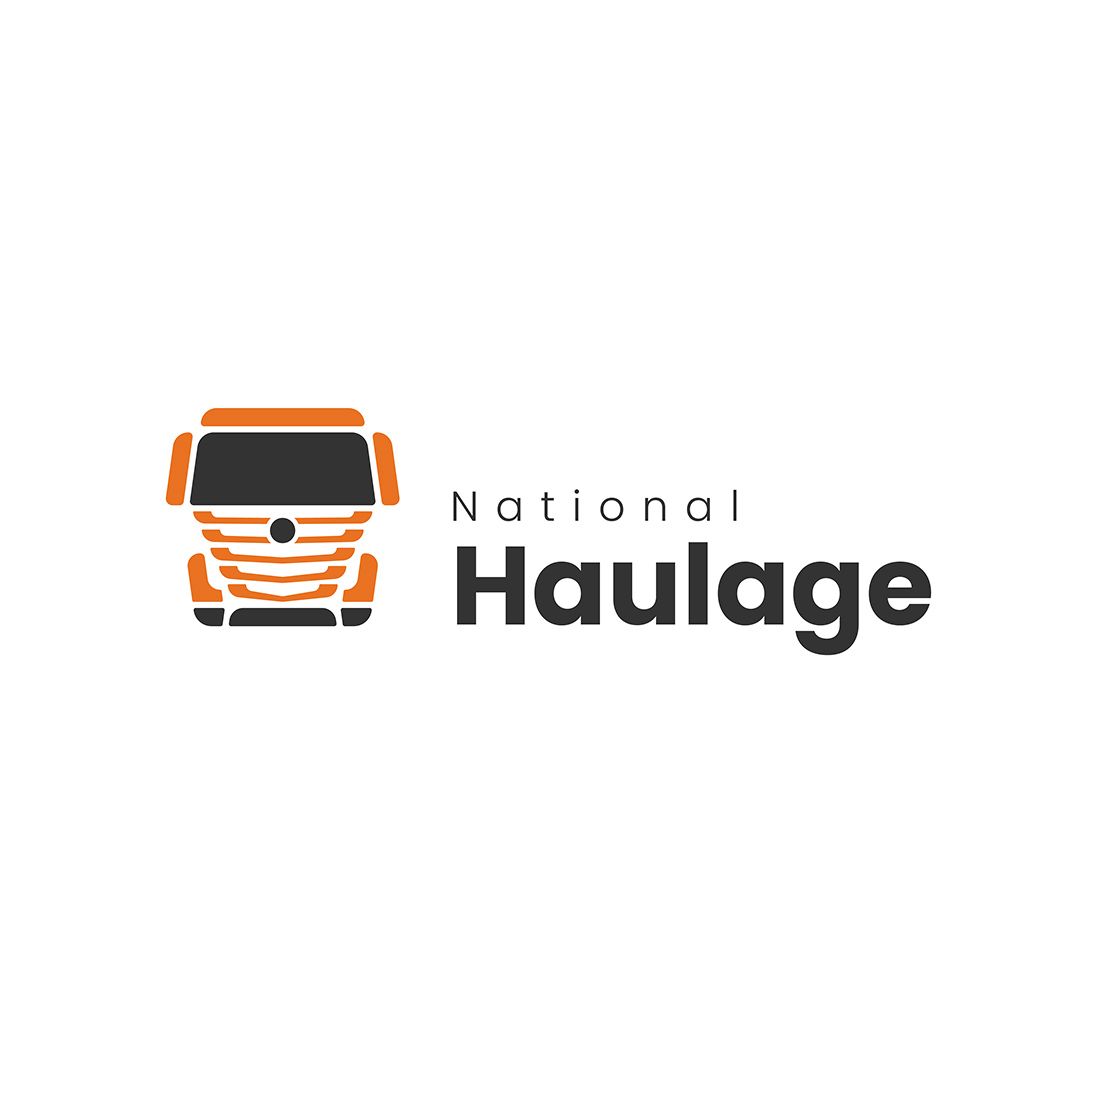 National Haulage Logo for your projects.